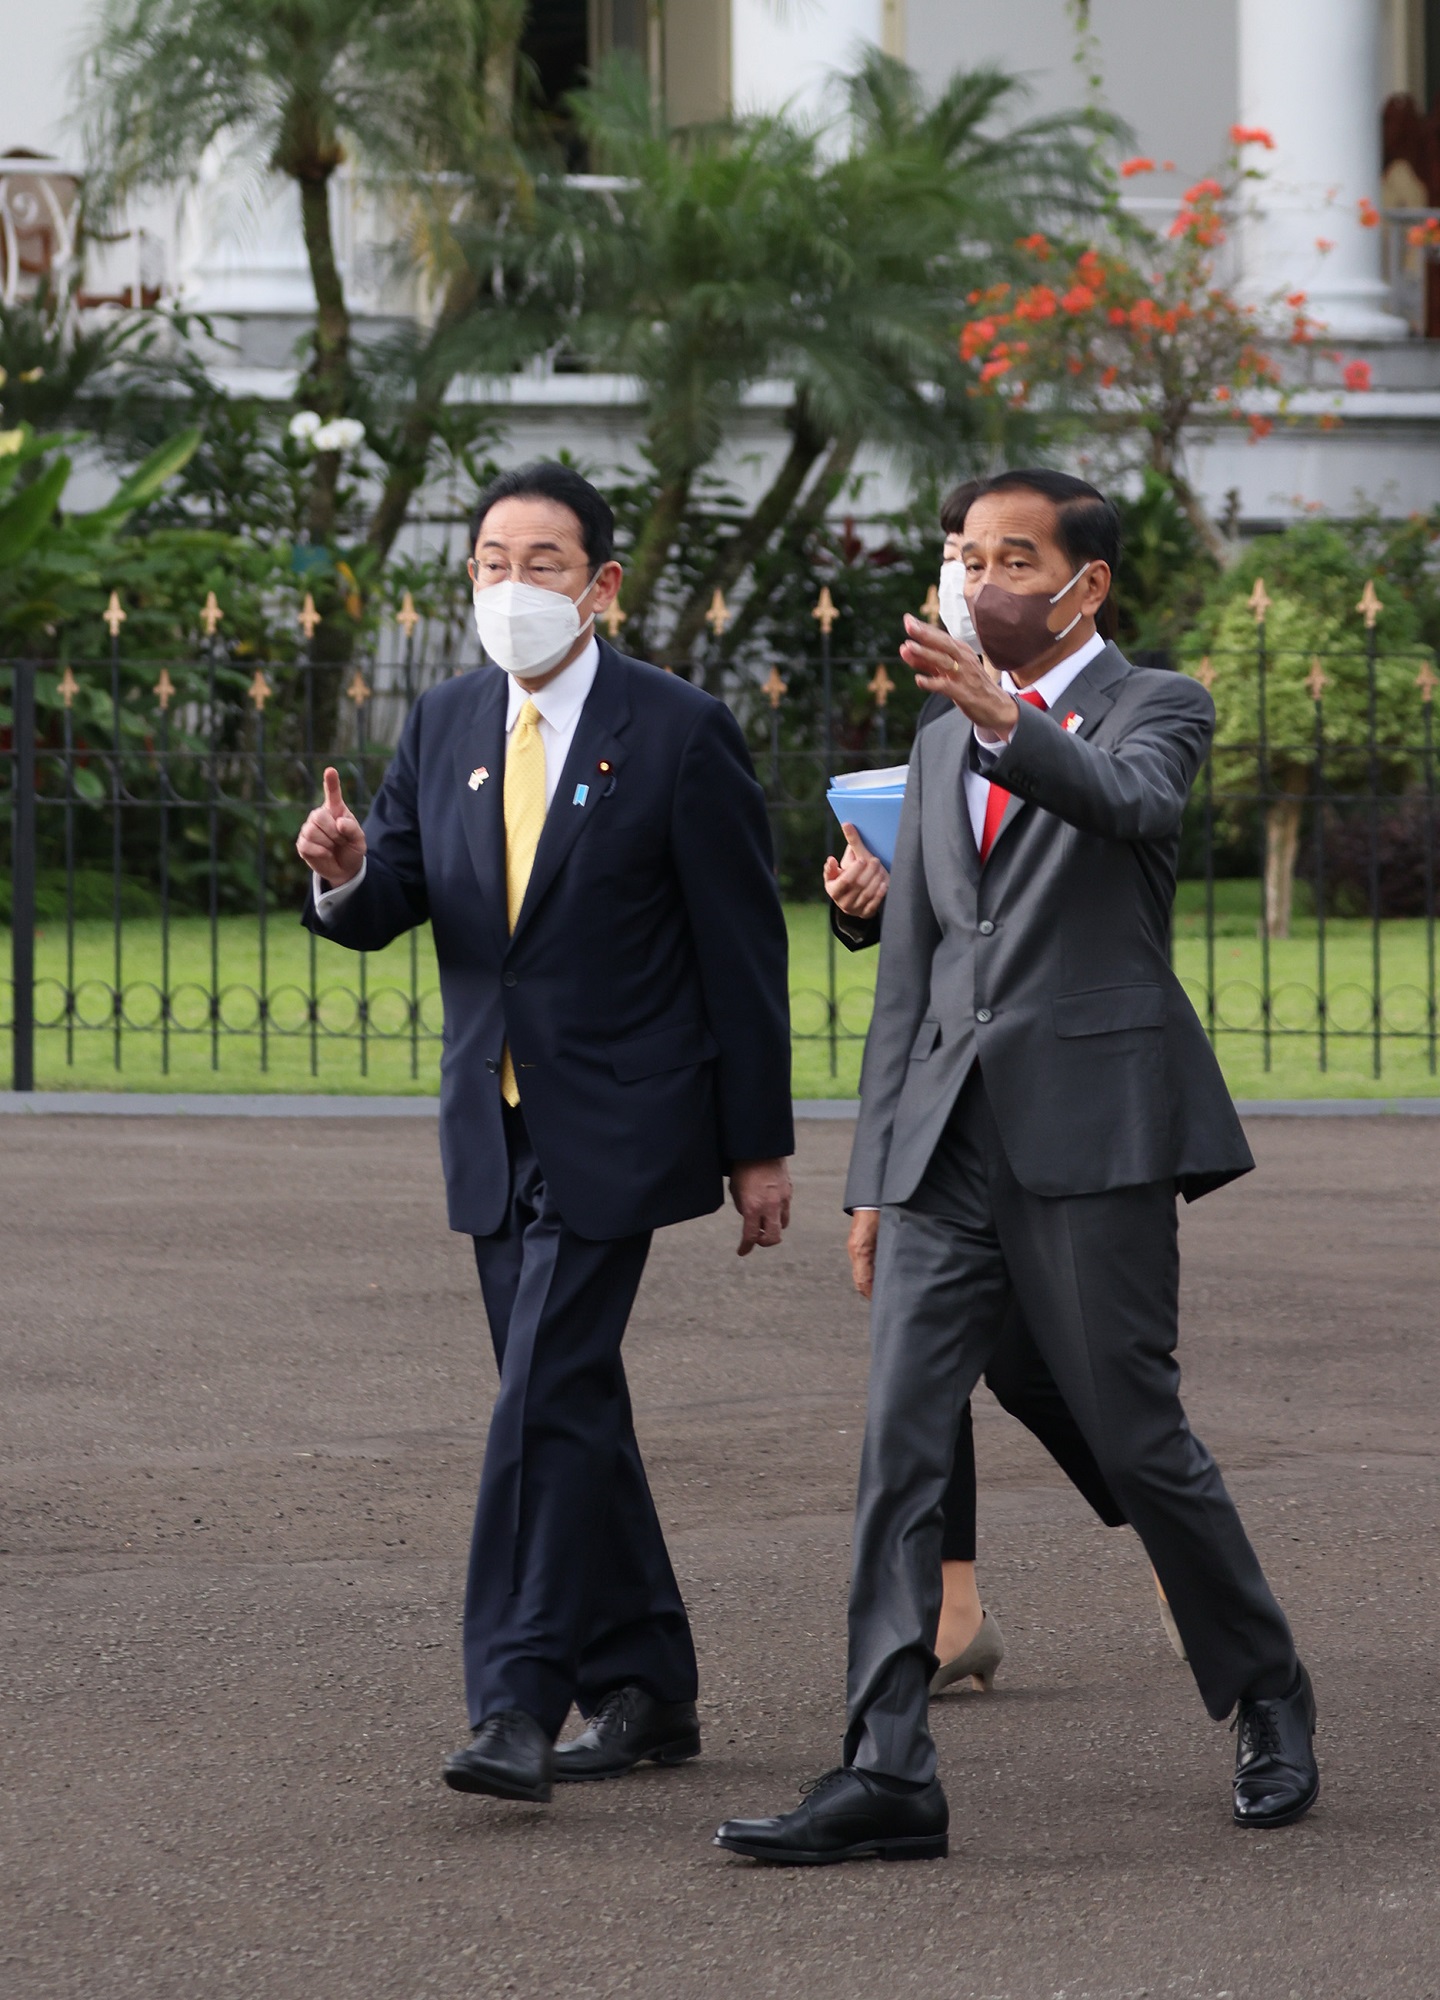 Photograph of the two leaders heading to a tree planting ceremony